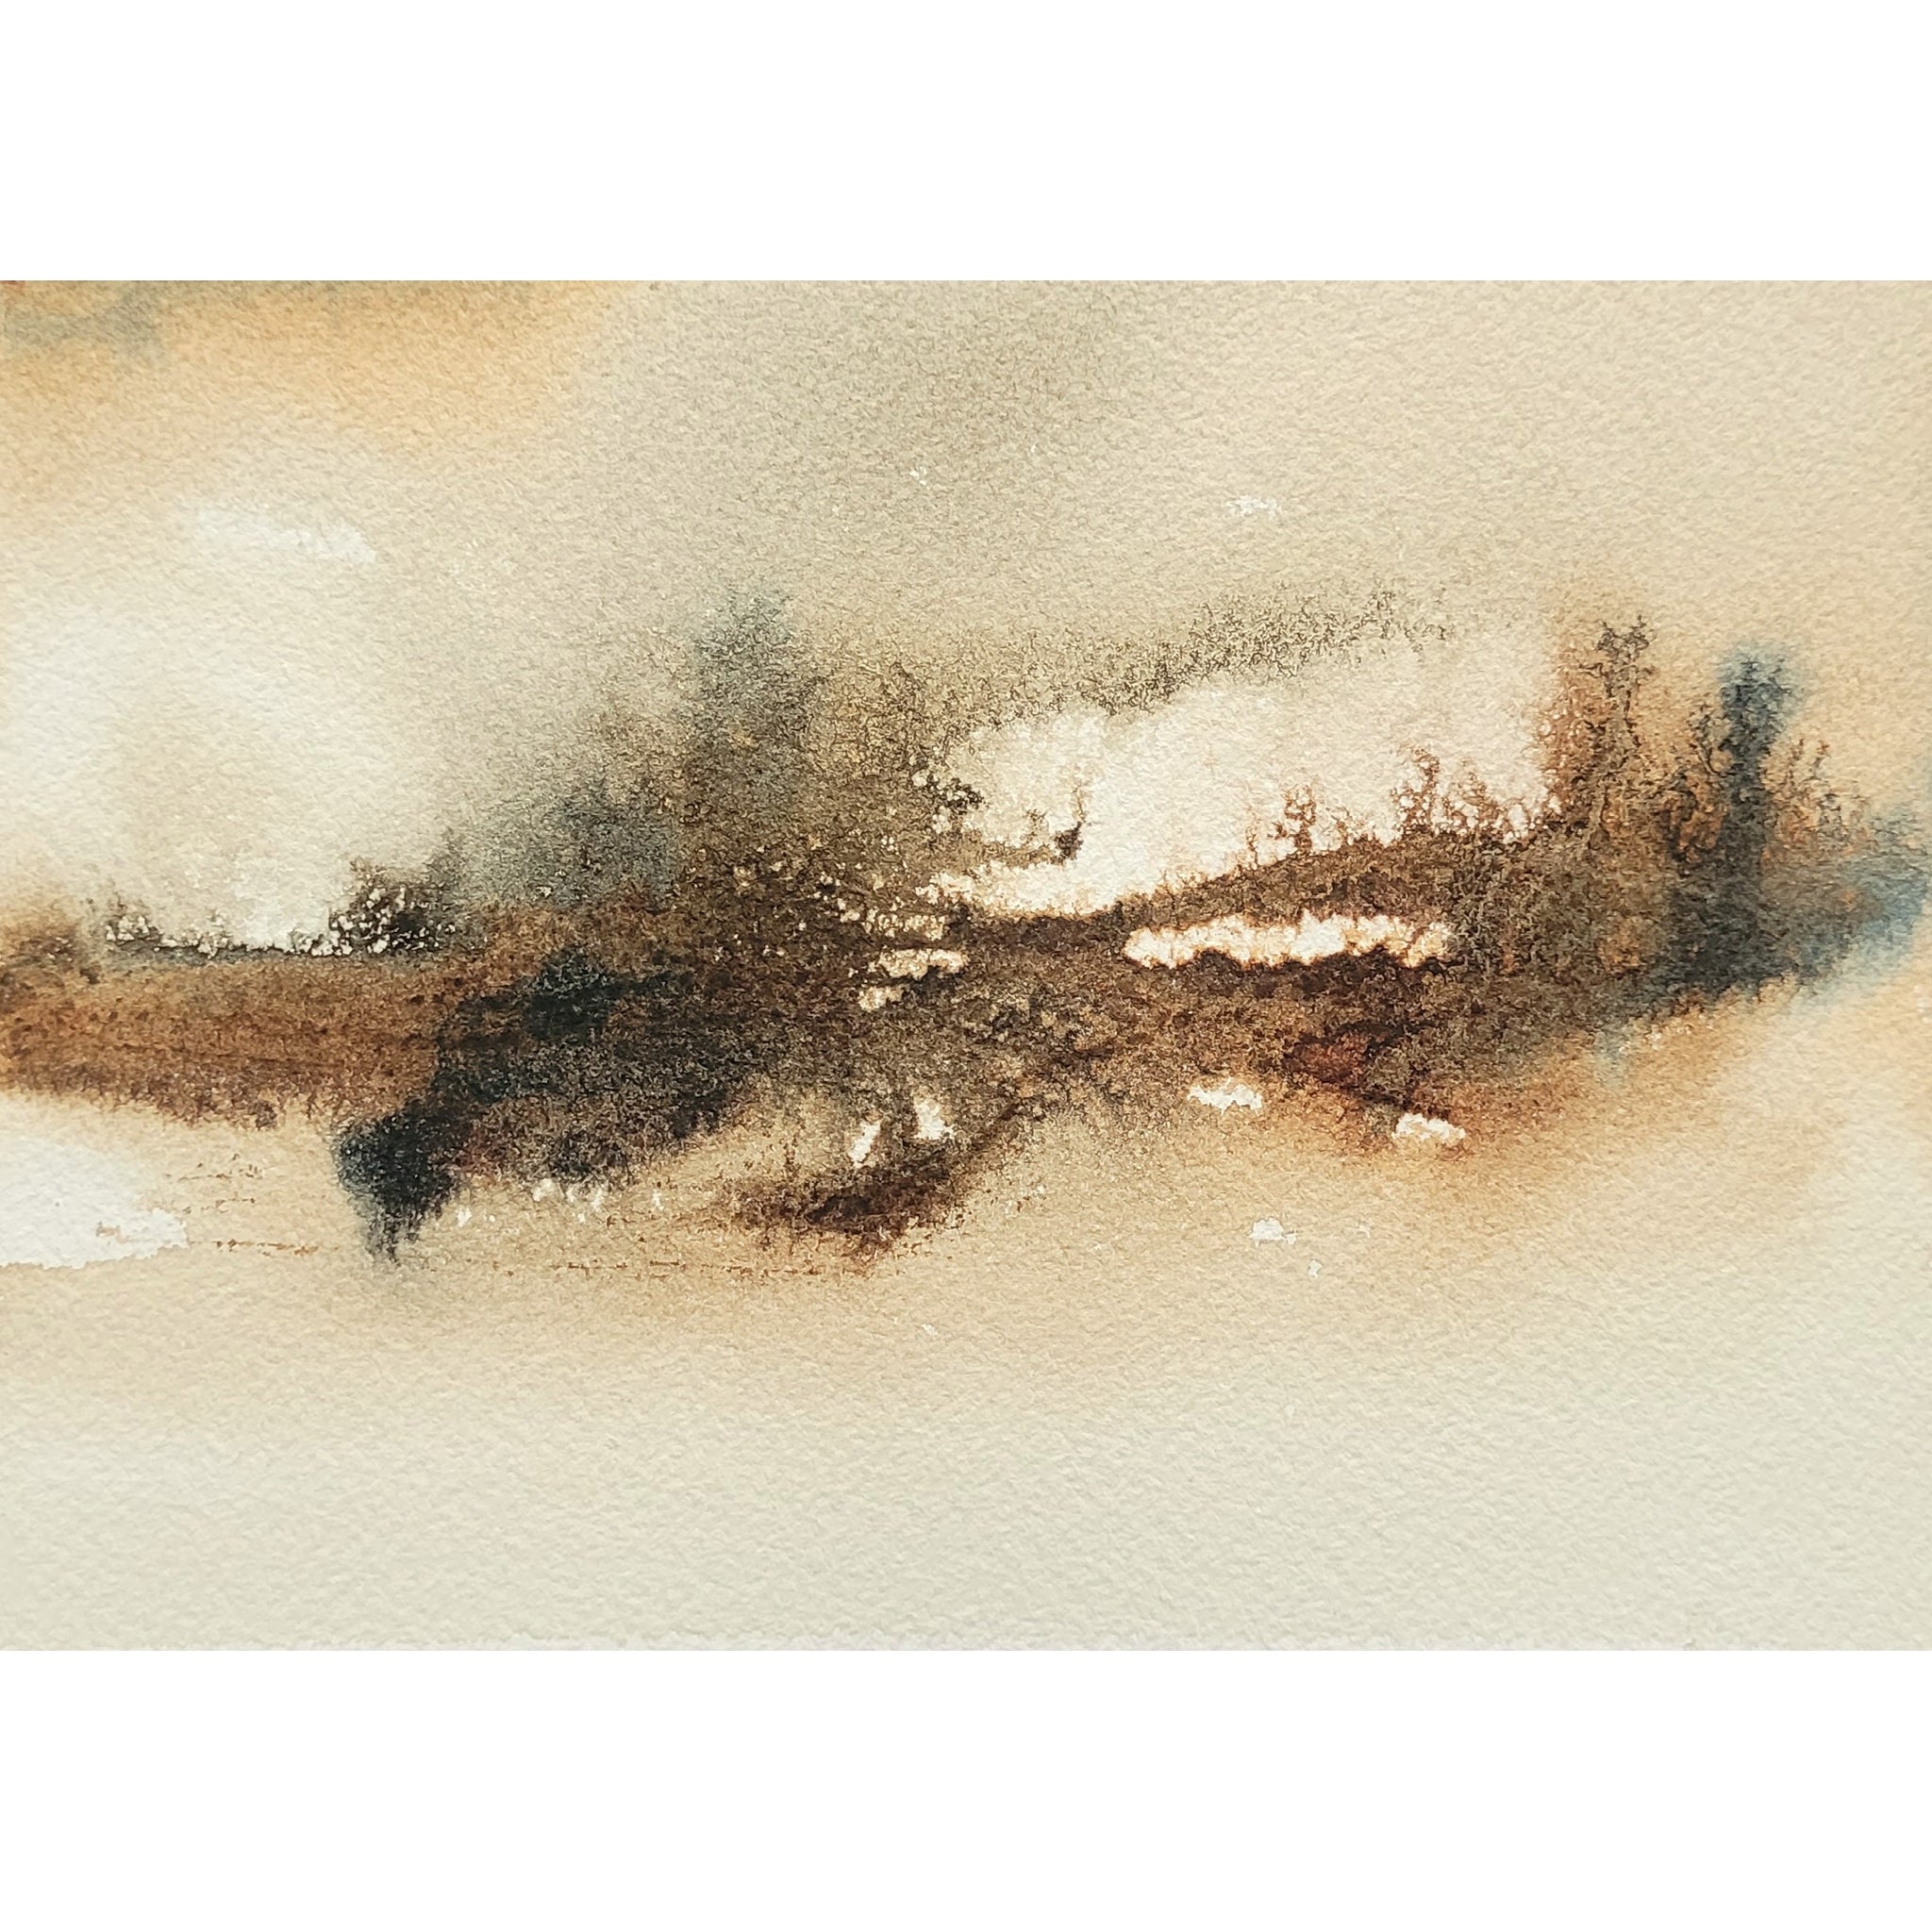 Earth Tone Rust Brown Abstract Landscape Painting Original Watercolor Art 5 x 7 inch - Dendritic Earth